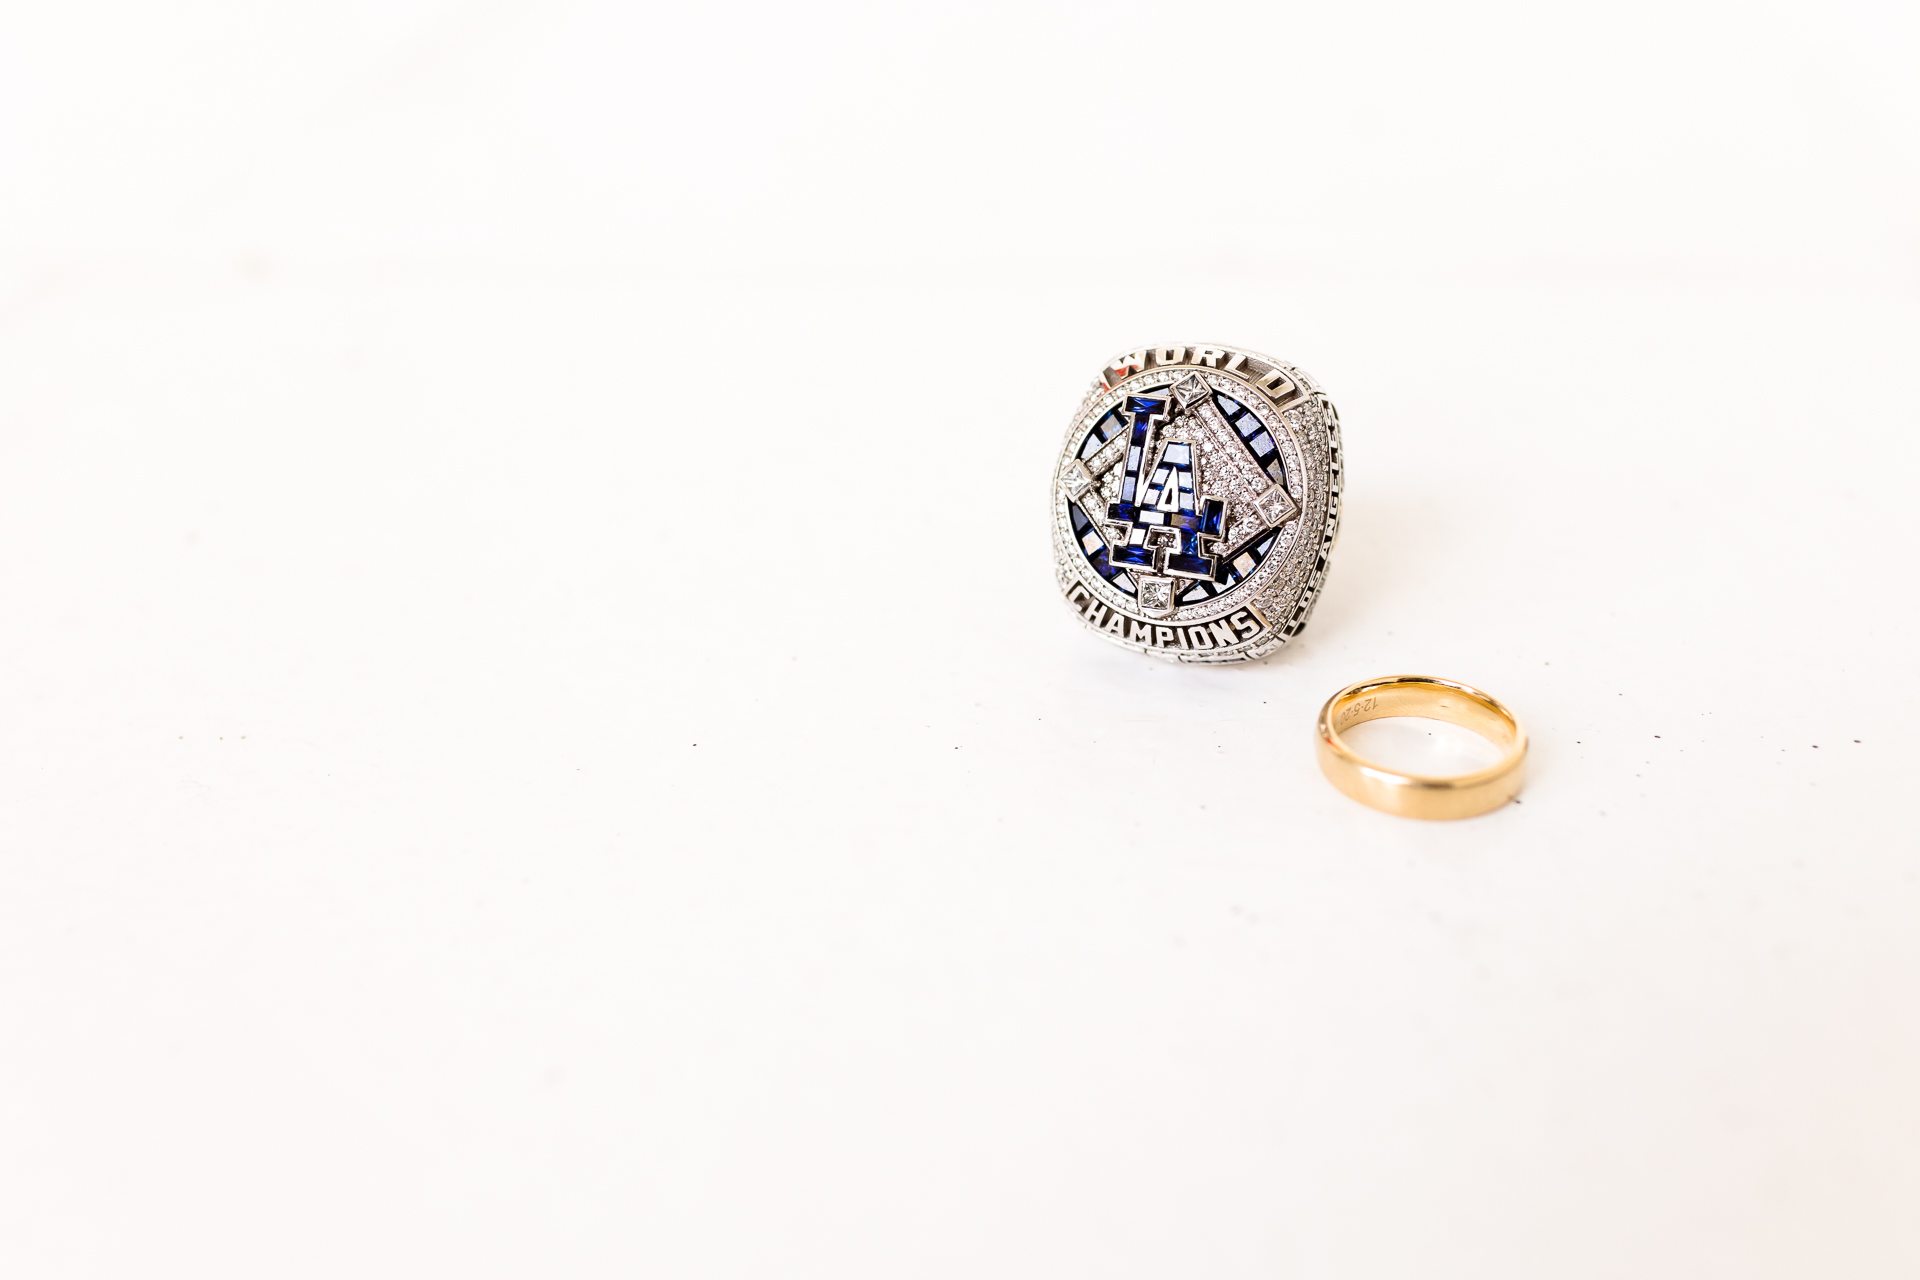 groom's wedding ring with LA Dodgers world series ring